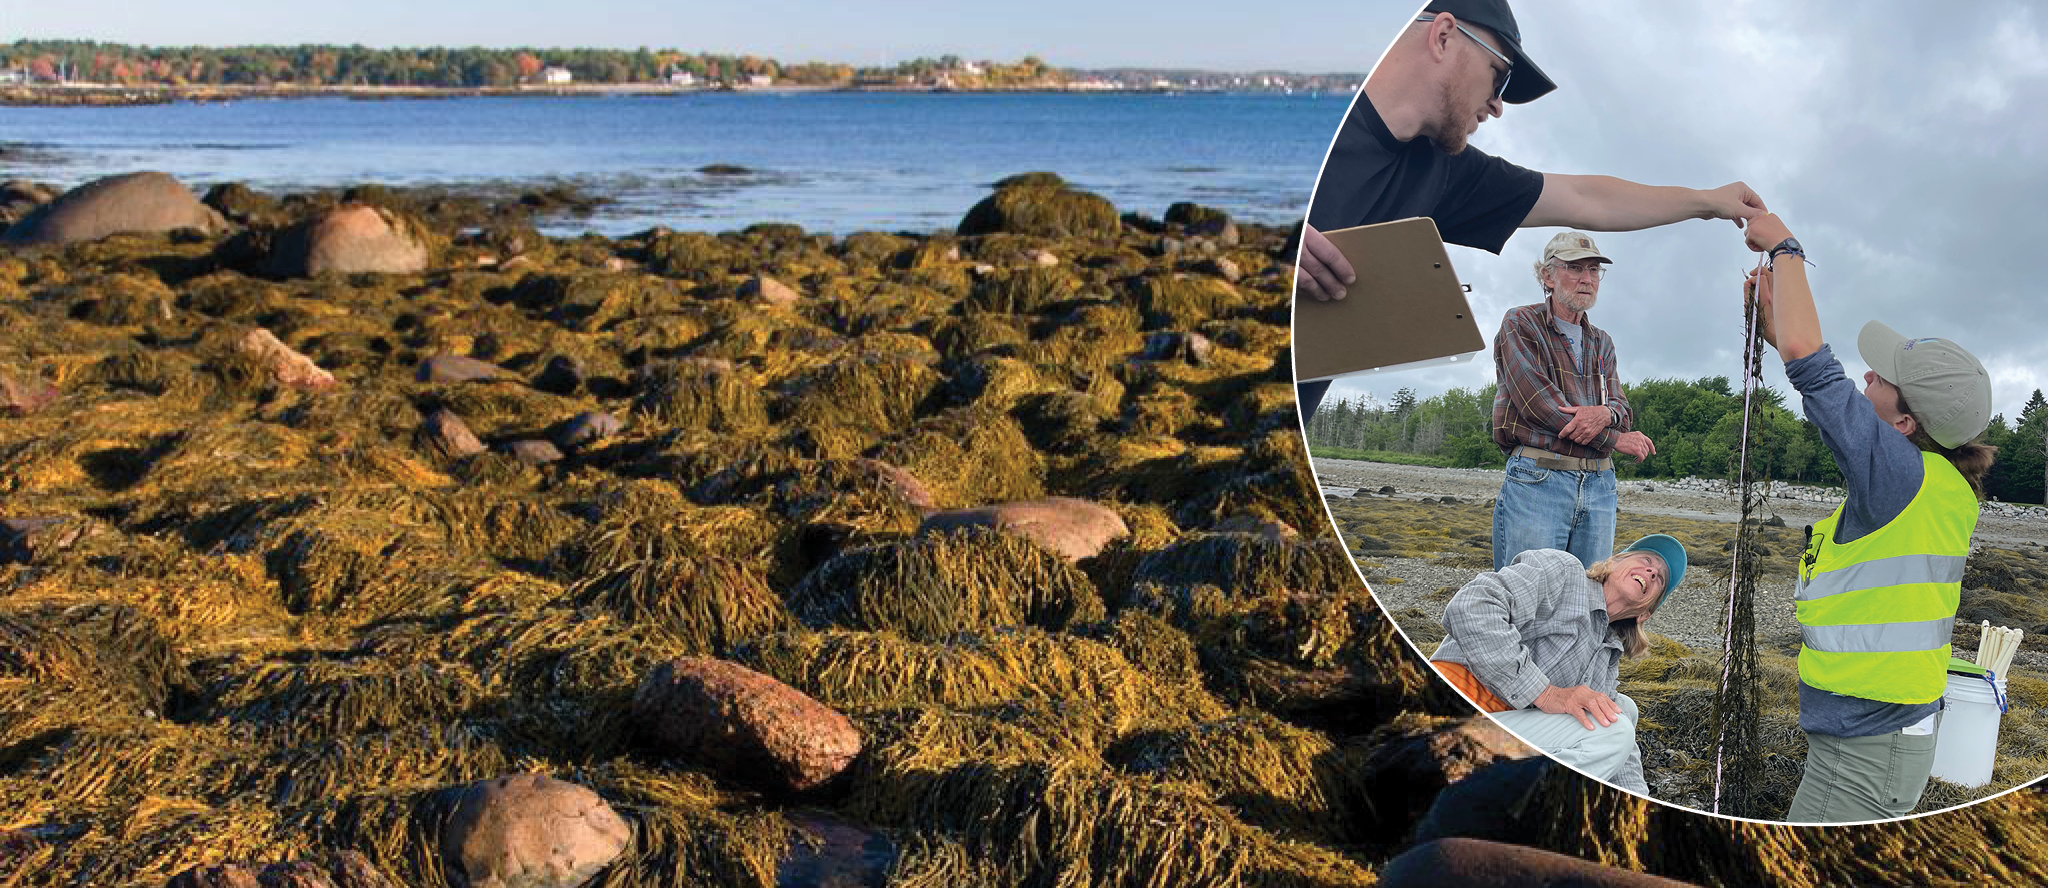 At the left is a view of rockweed covered rocks in the intertidal zone. At the right is a photo of 4 people, standing and kneeling in the intertidal zone as they measure rockweed.